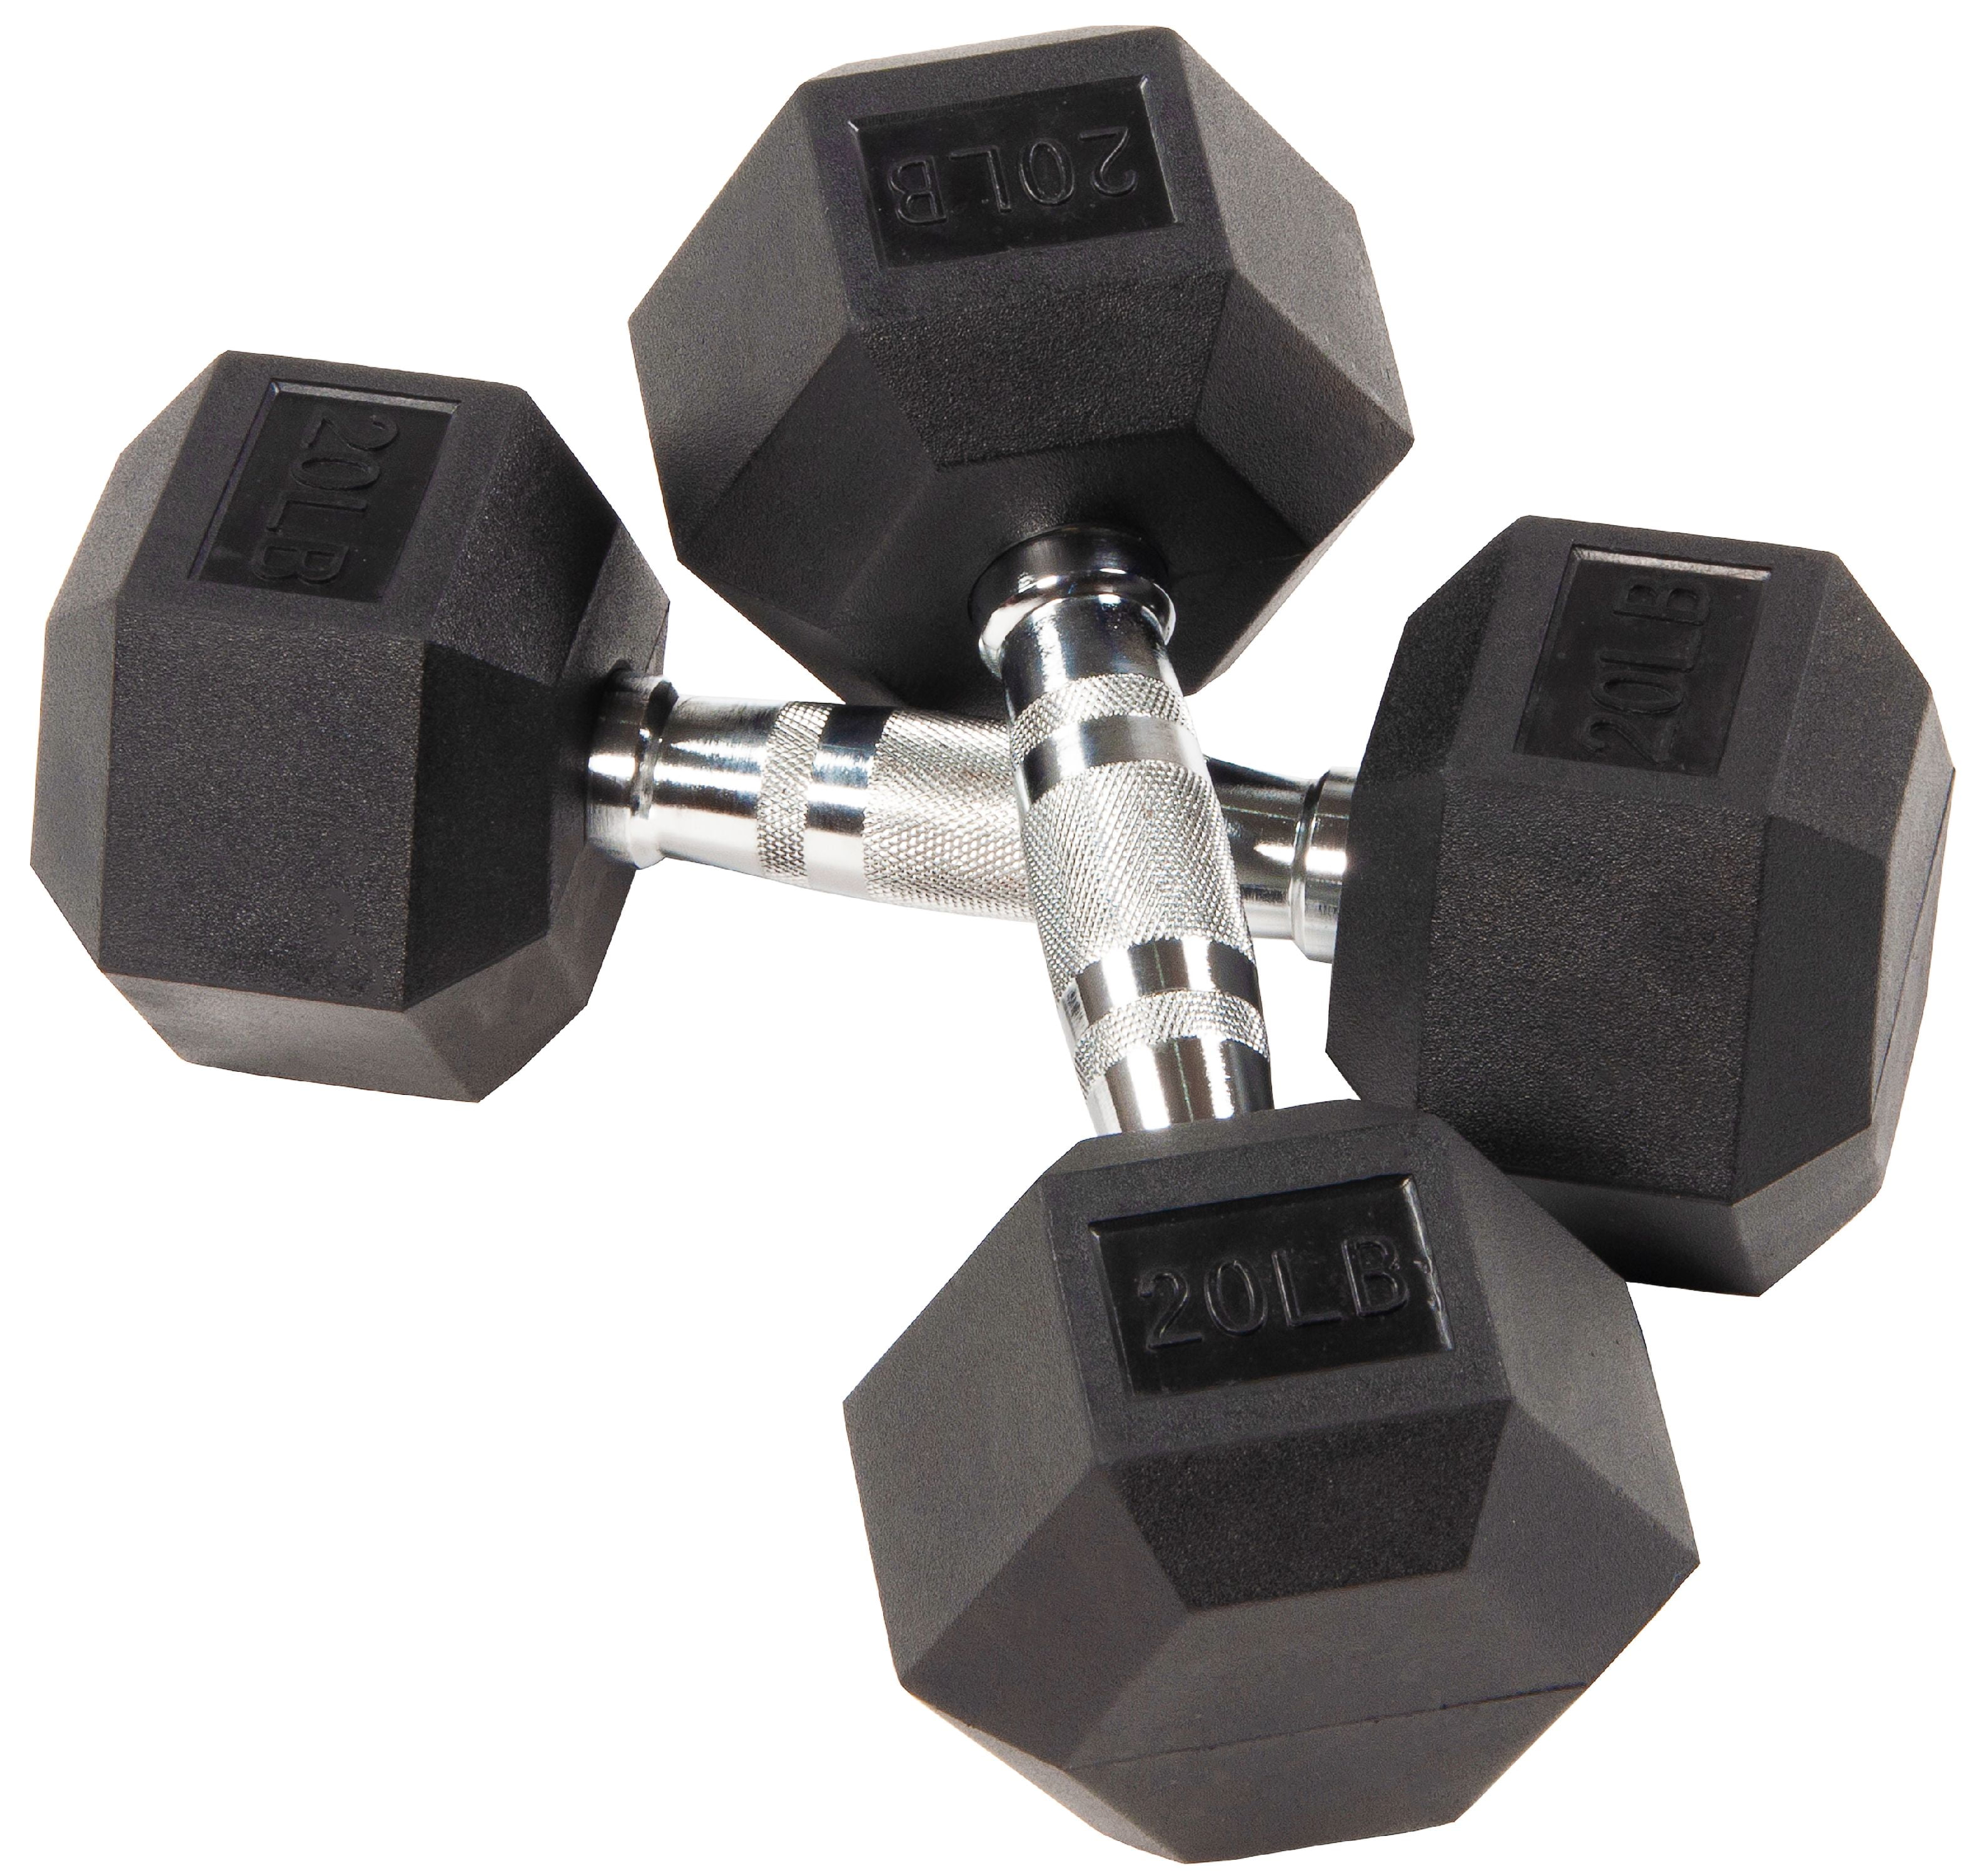 select weight. Details about   NEW  COATED RUBBER HEX DUMBBELLS 